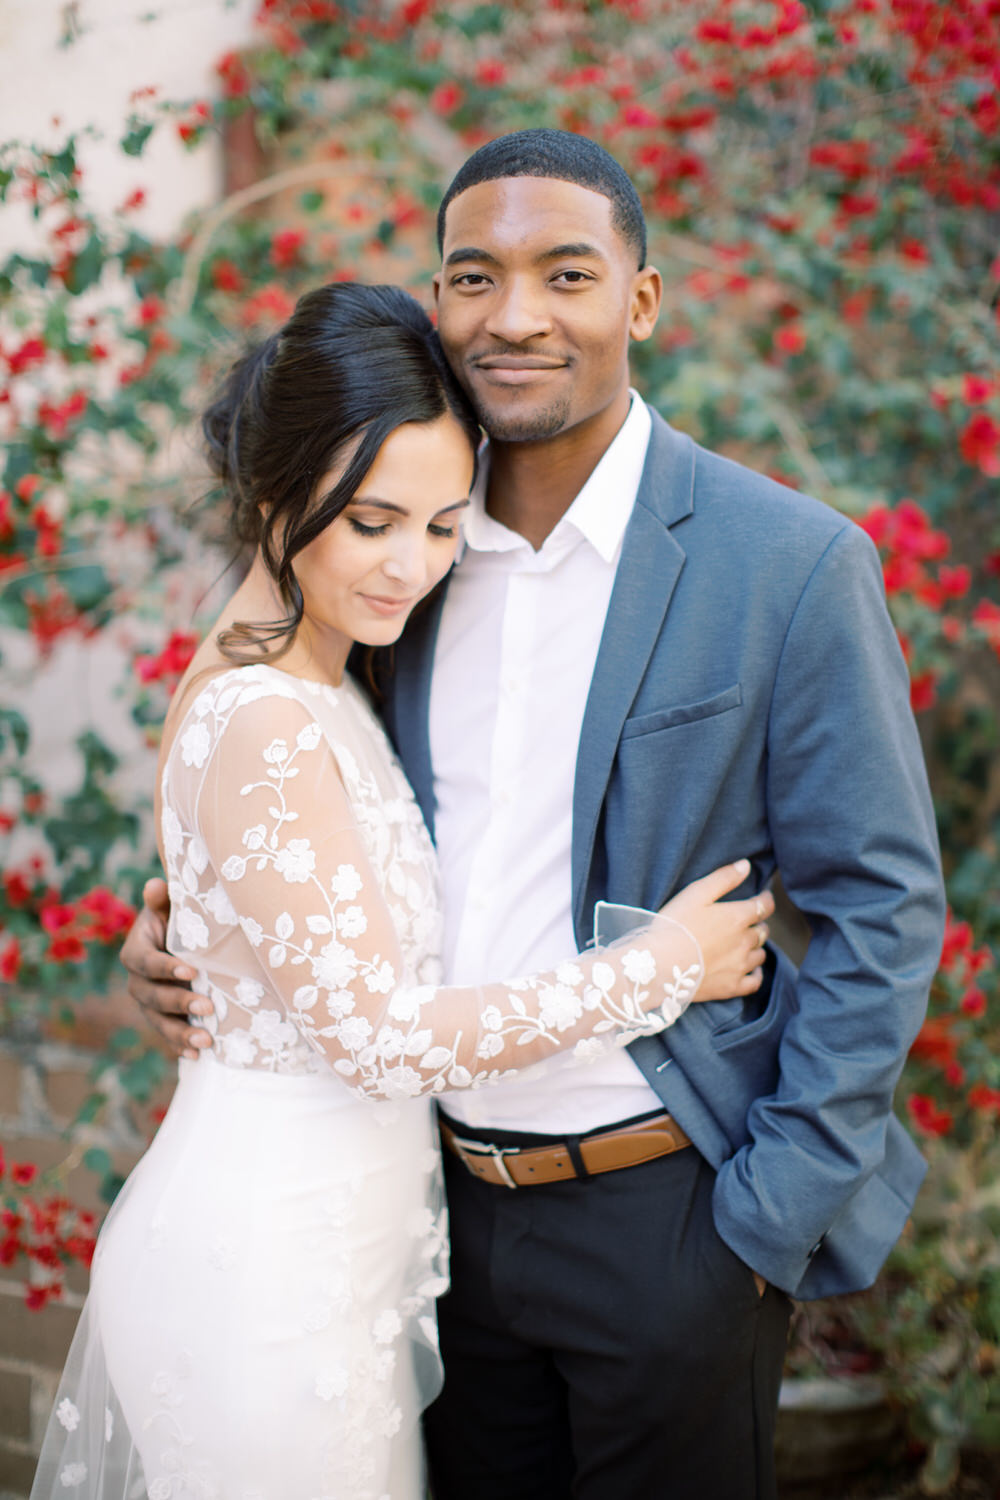 black man in blue suit embracing his fiancee in wedding dress against red flowers wall